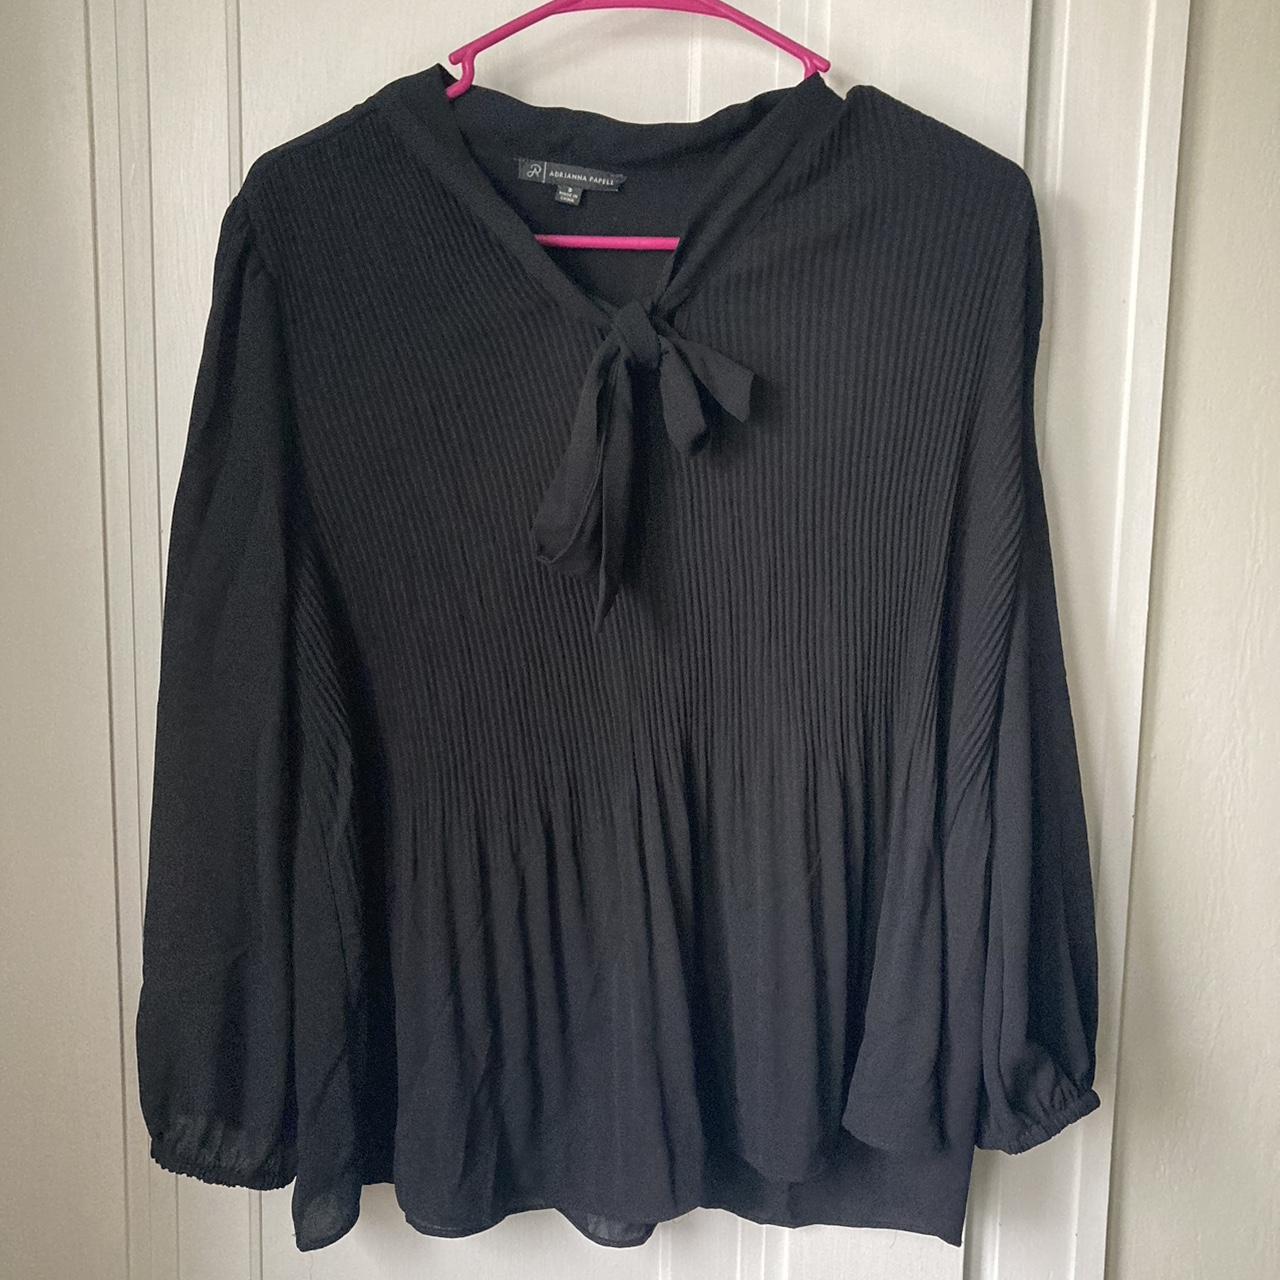 item listed by thriftingtay